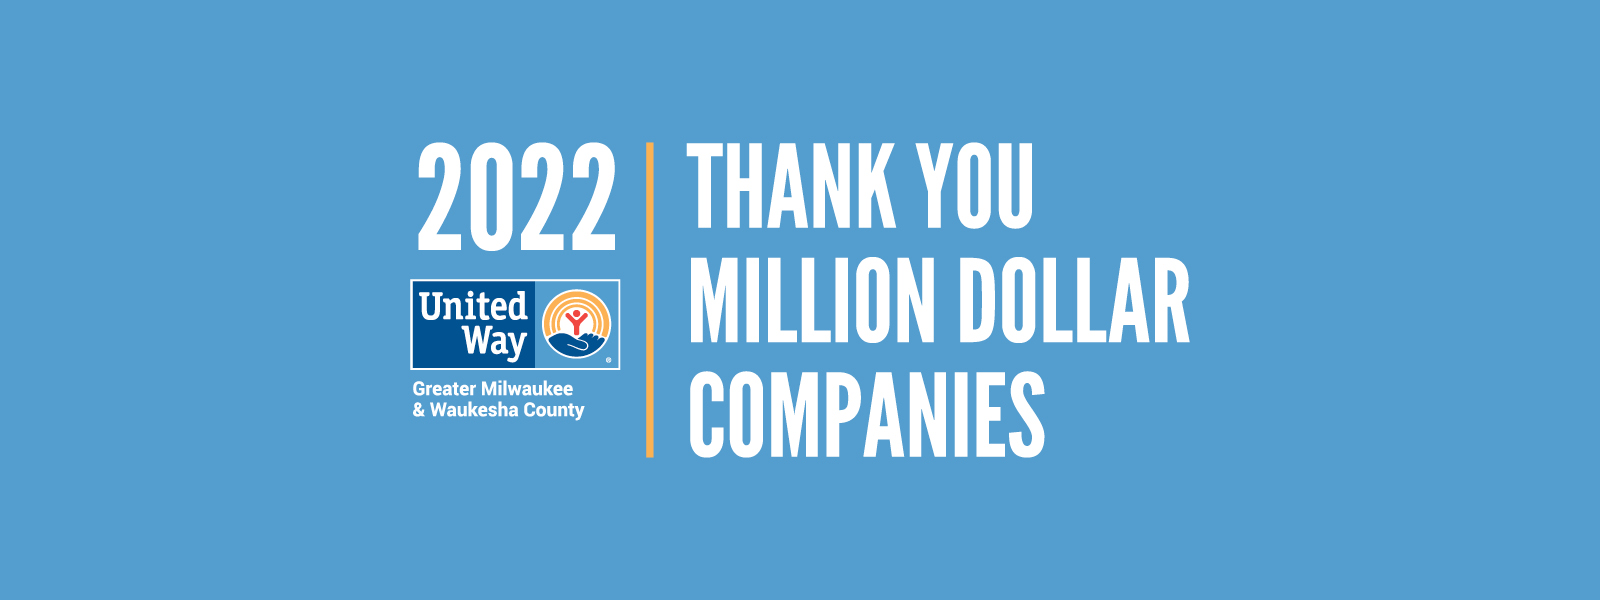 blue image with words Thank You Million Dollar Companies